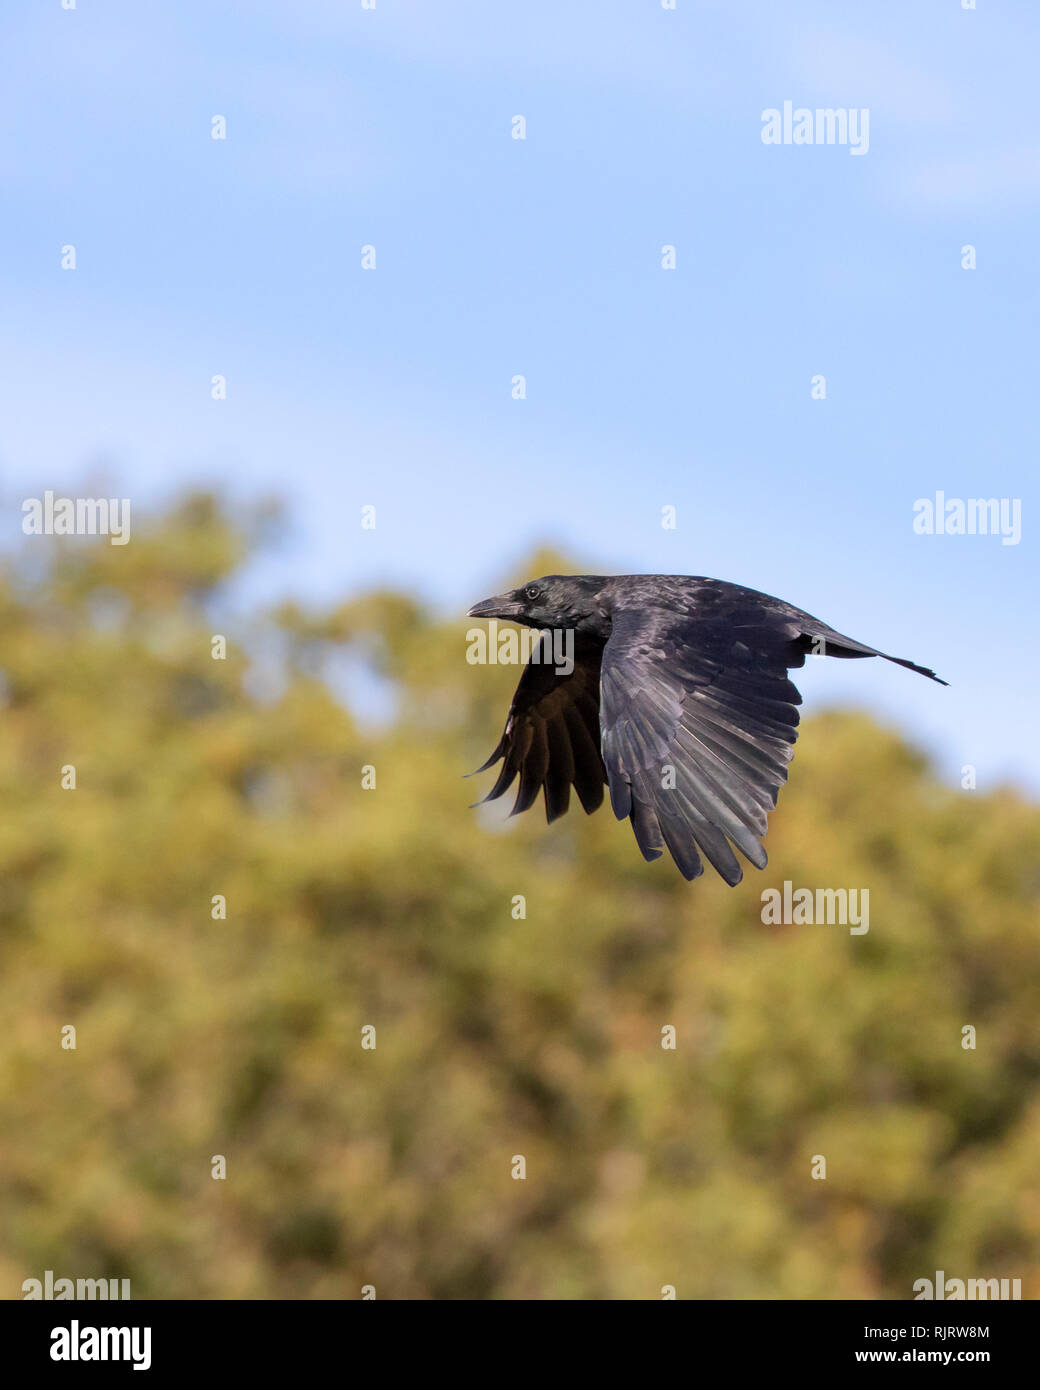 Common raven, Corvus corax in the wild flying with trees and blue sky in the background Stock Photo